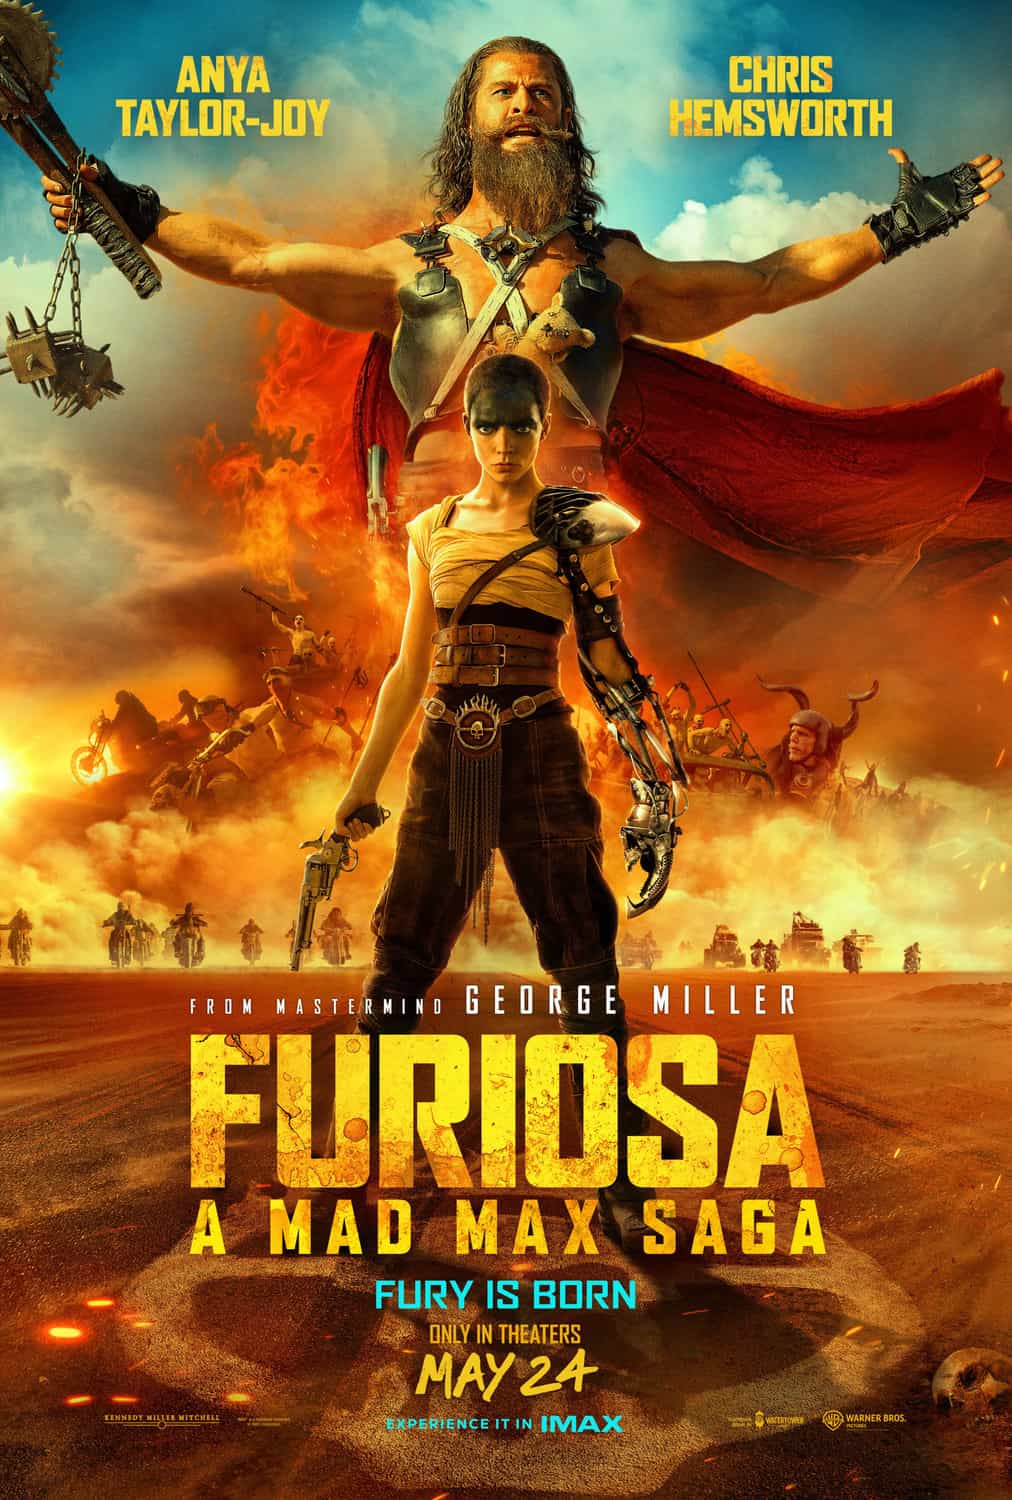 New trailer and movie motion poster release for Furiosa furiosa